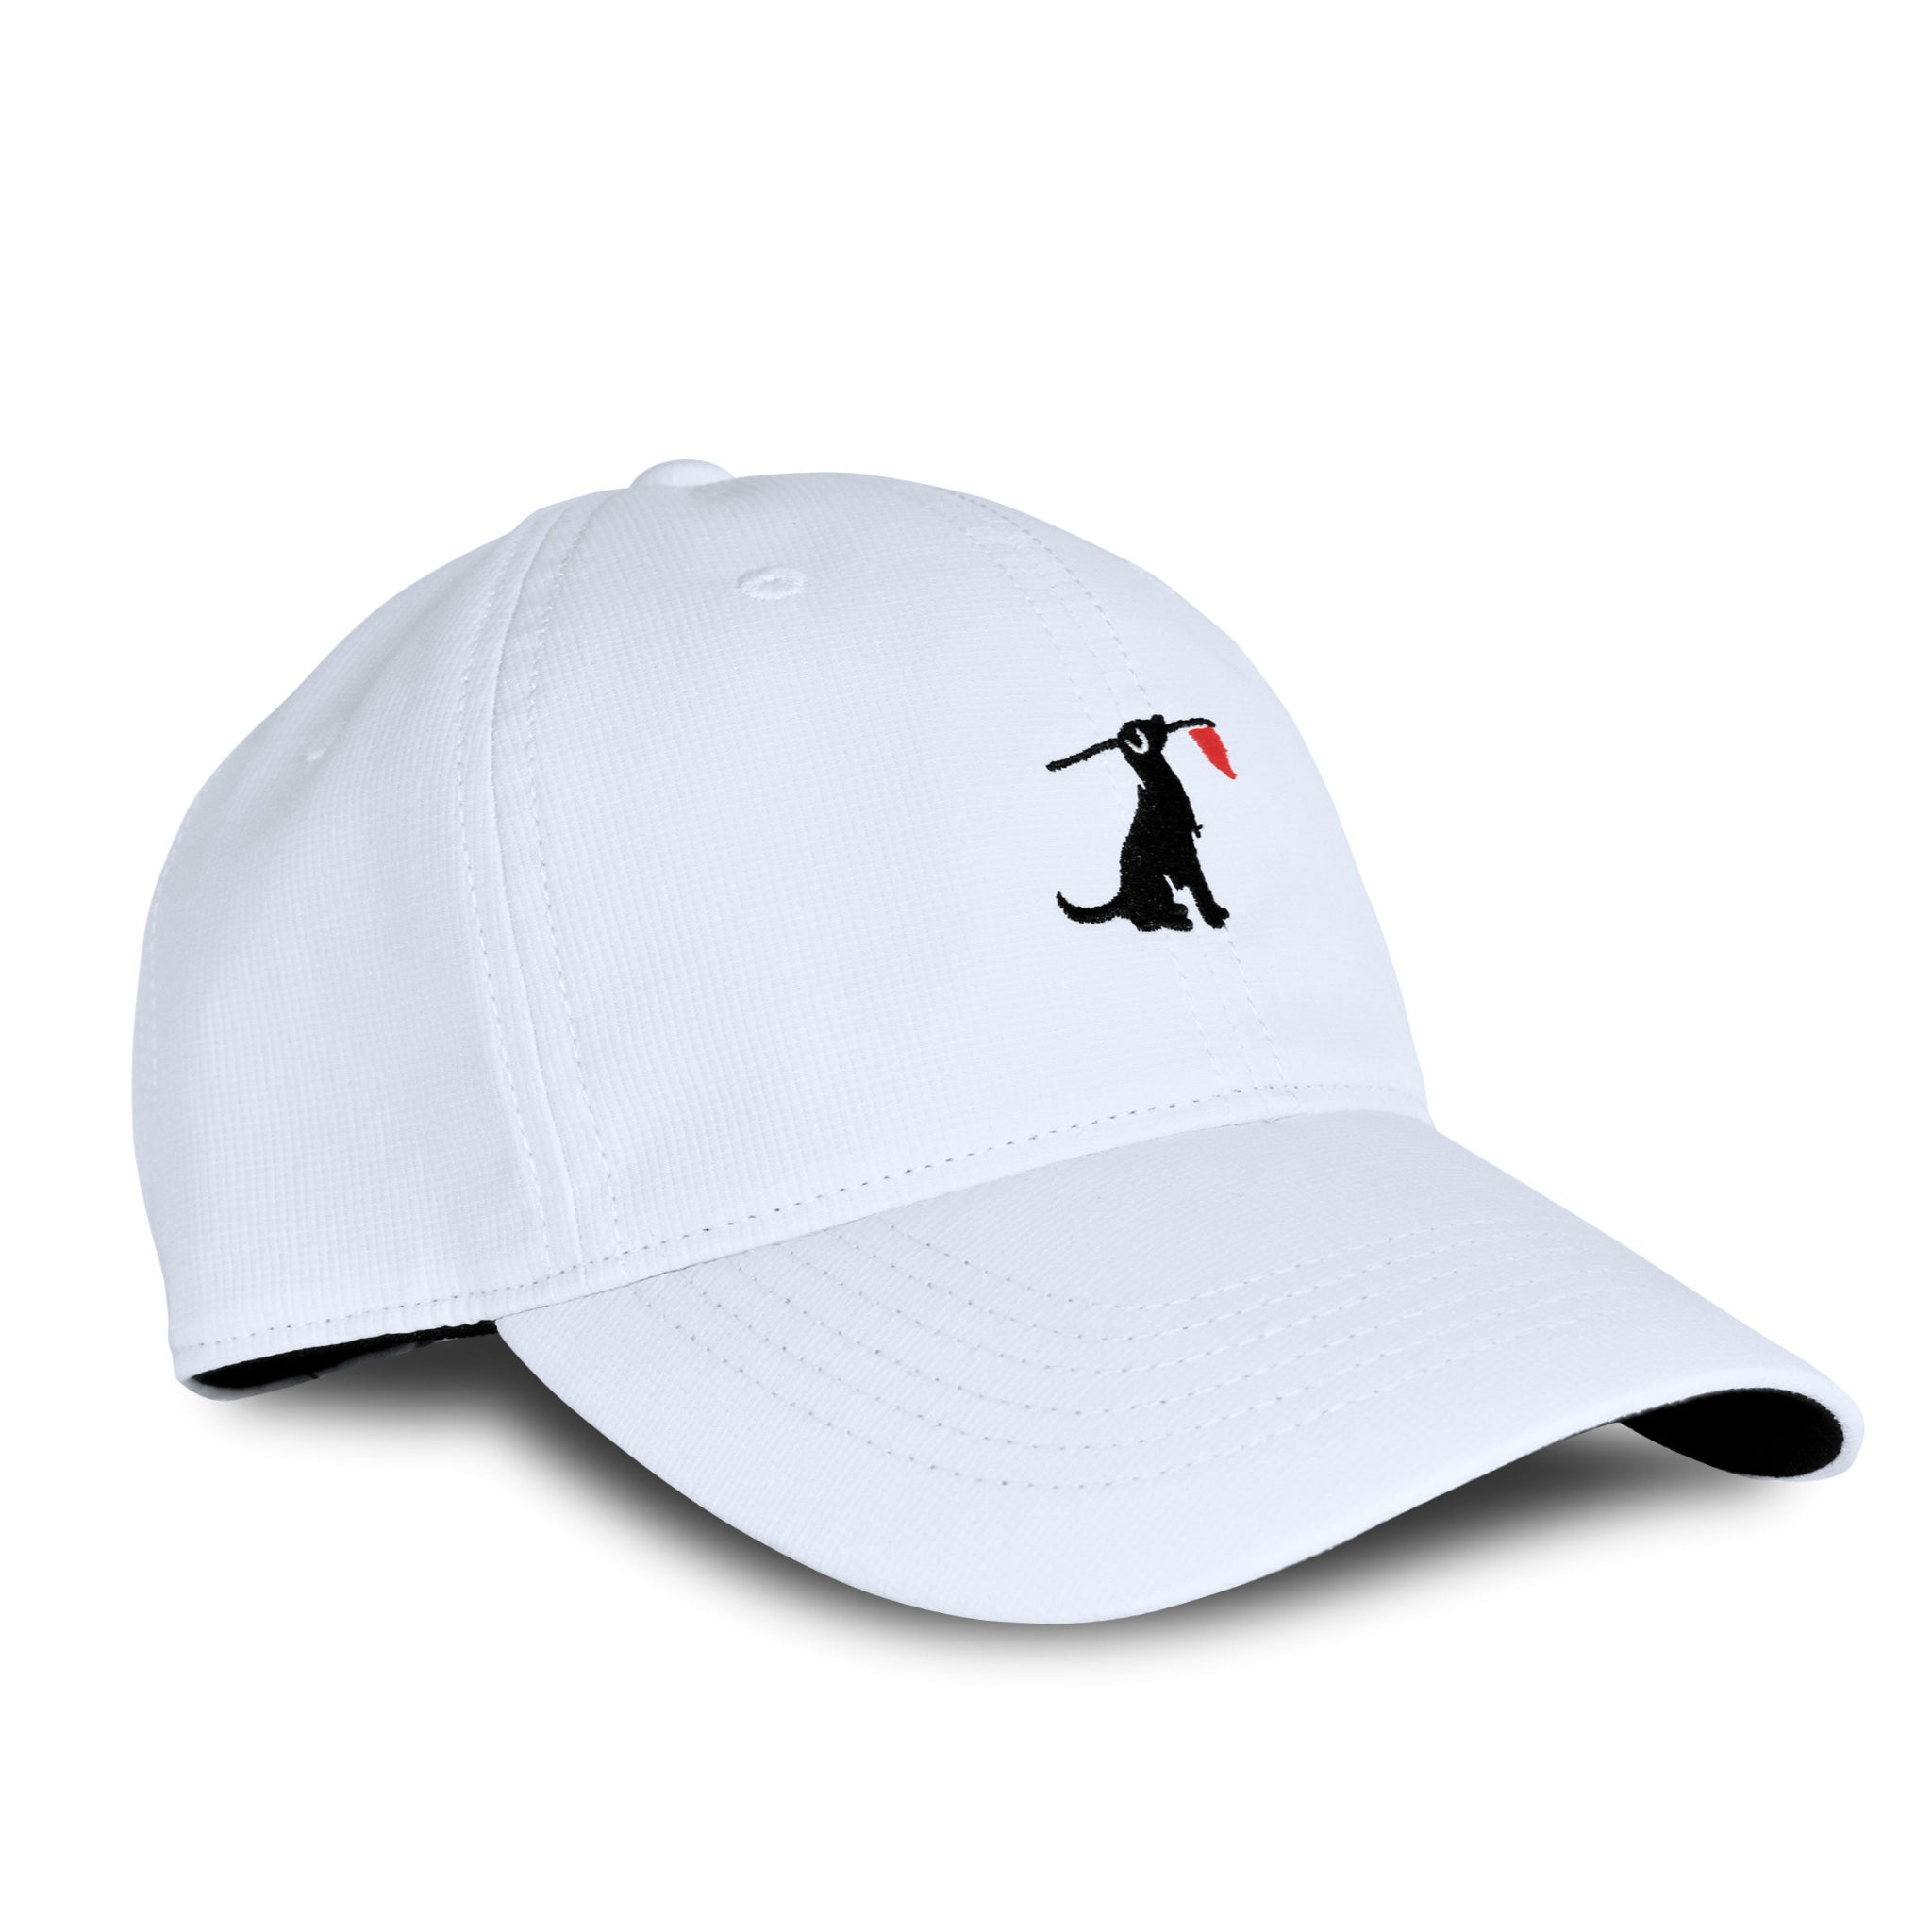 The Ace White Performance Hat